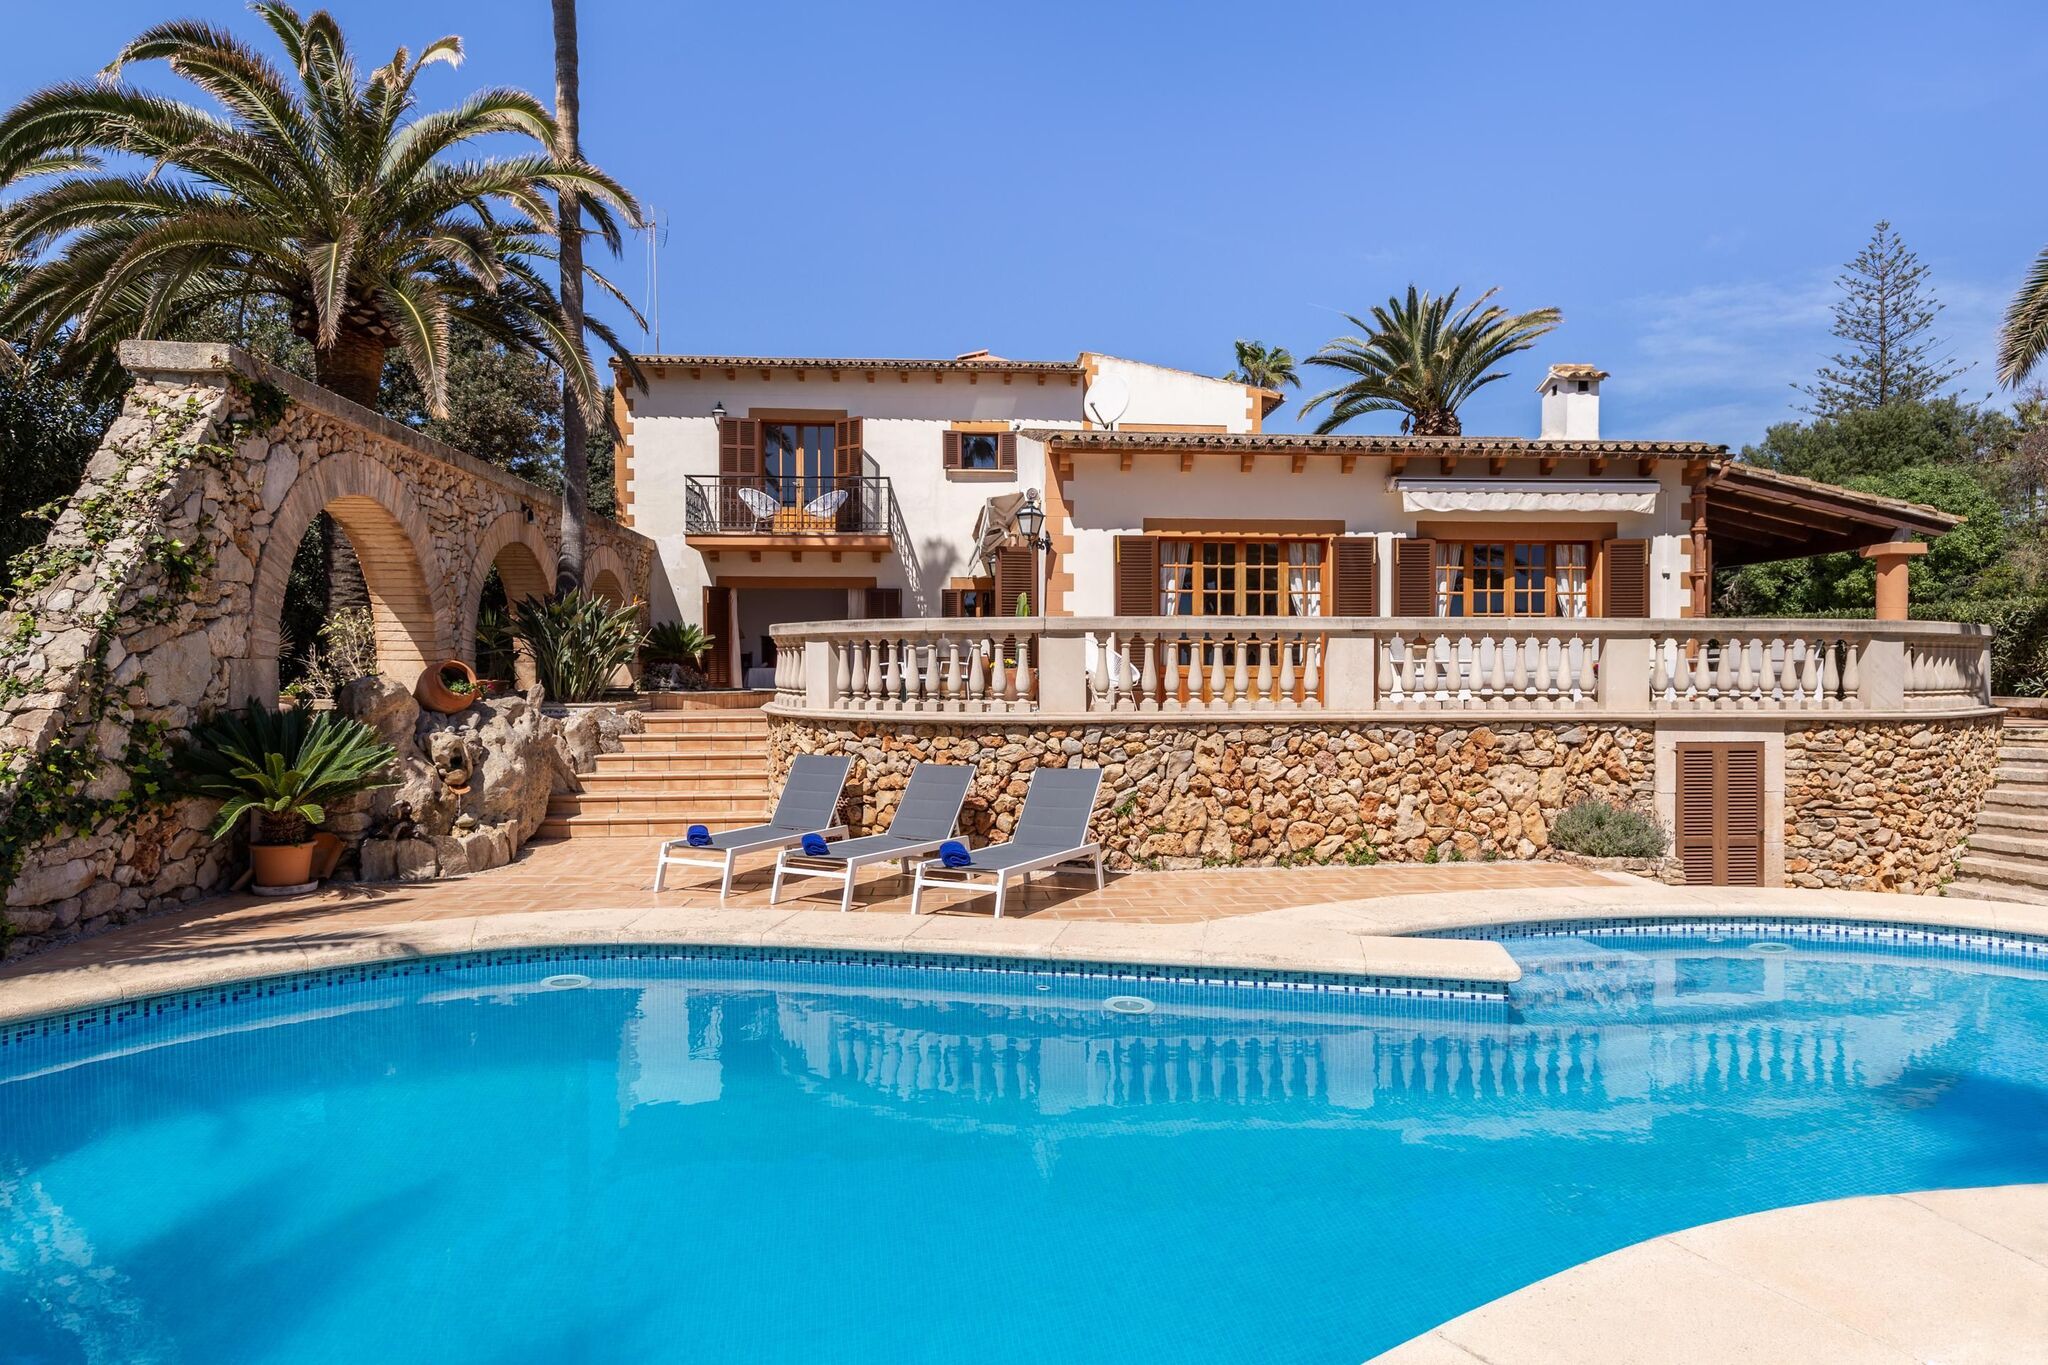 Beautiful villa for 8 people with pool, garden & terrace with sea views